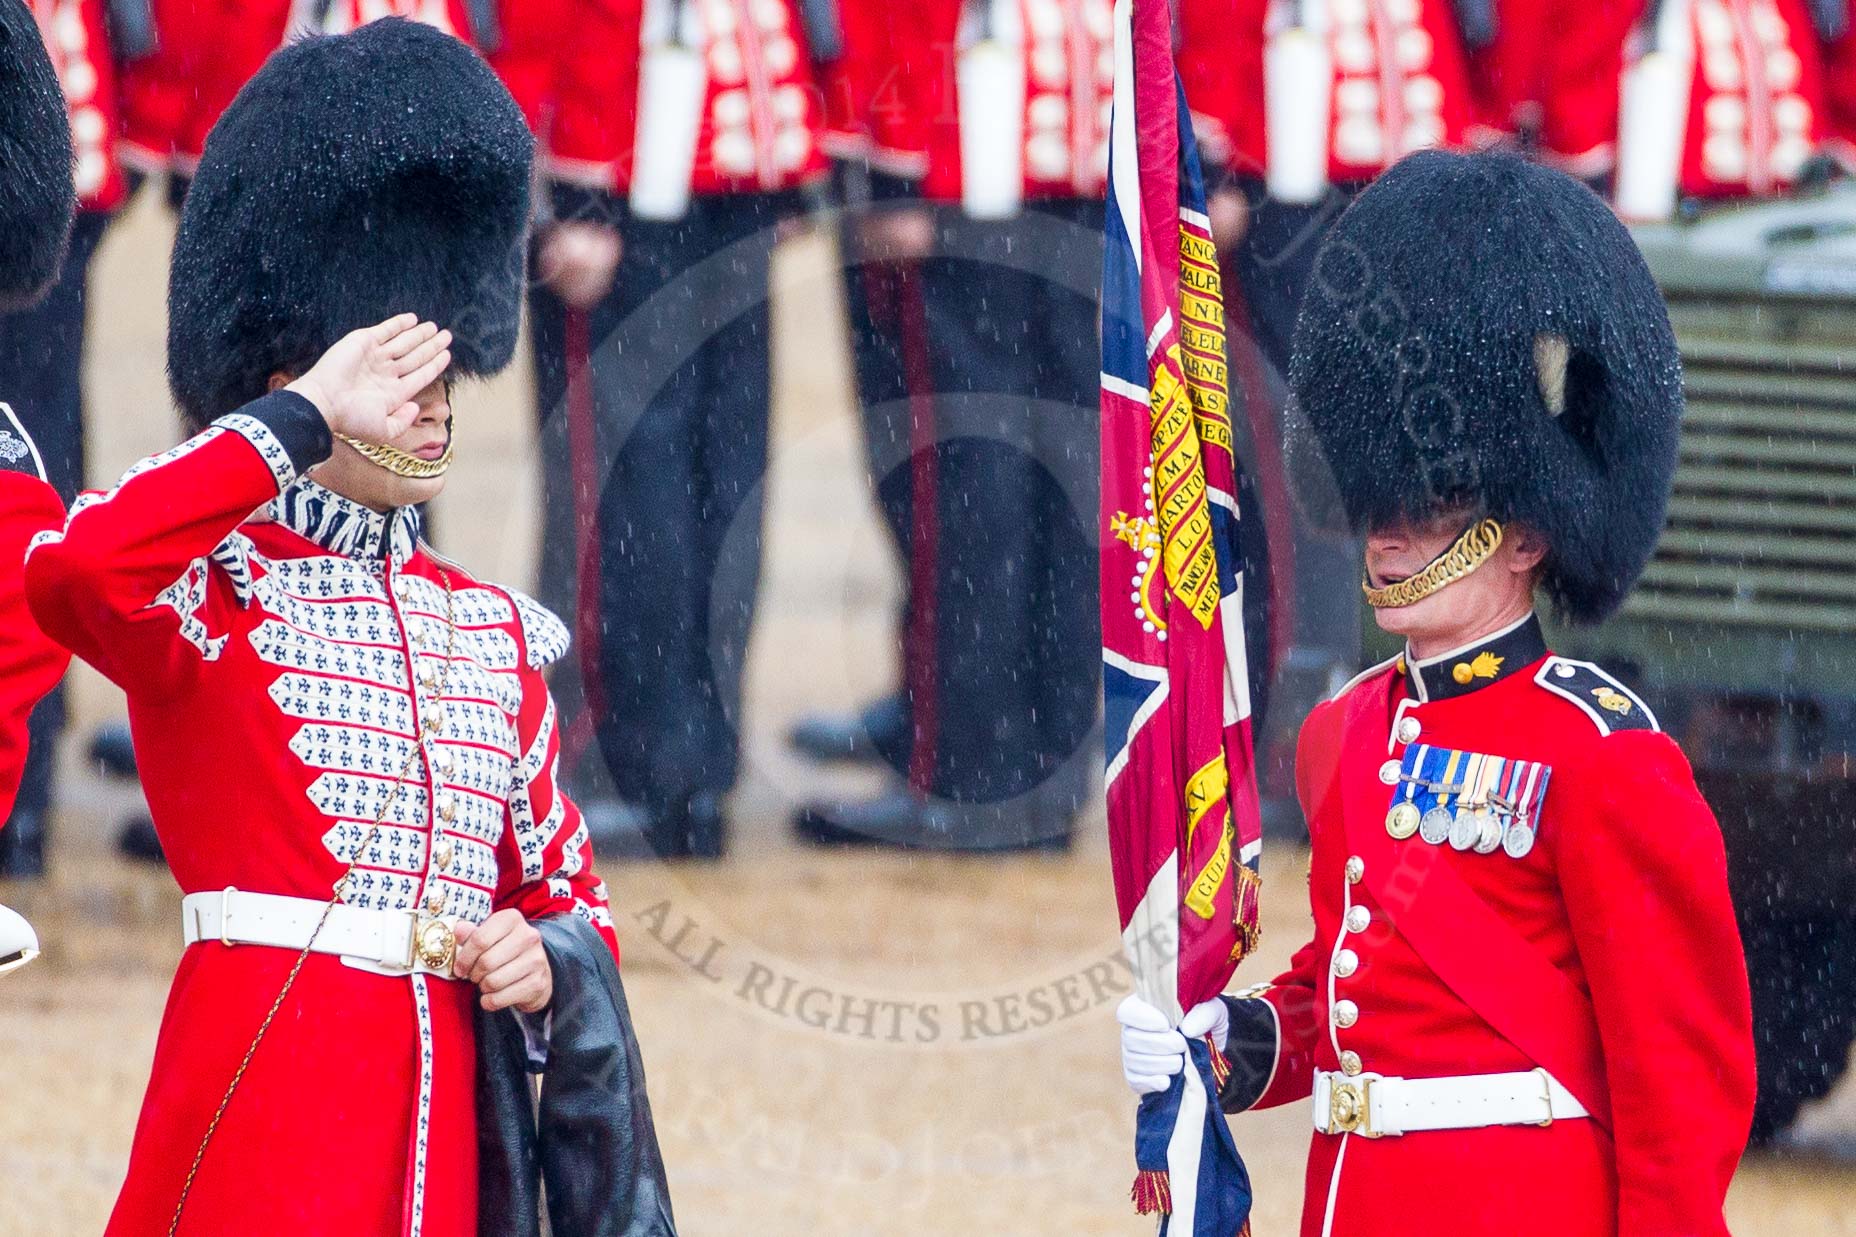 The Colonel's Review 2014.
Horse Guards Parade, Westminster,
London,

United Kingdom,
on 07 June 2014 at 10:29, image #134